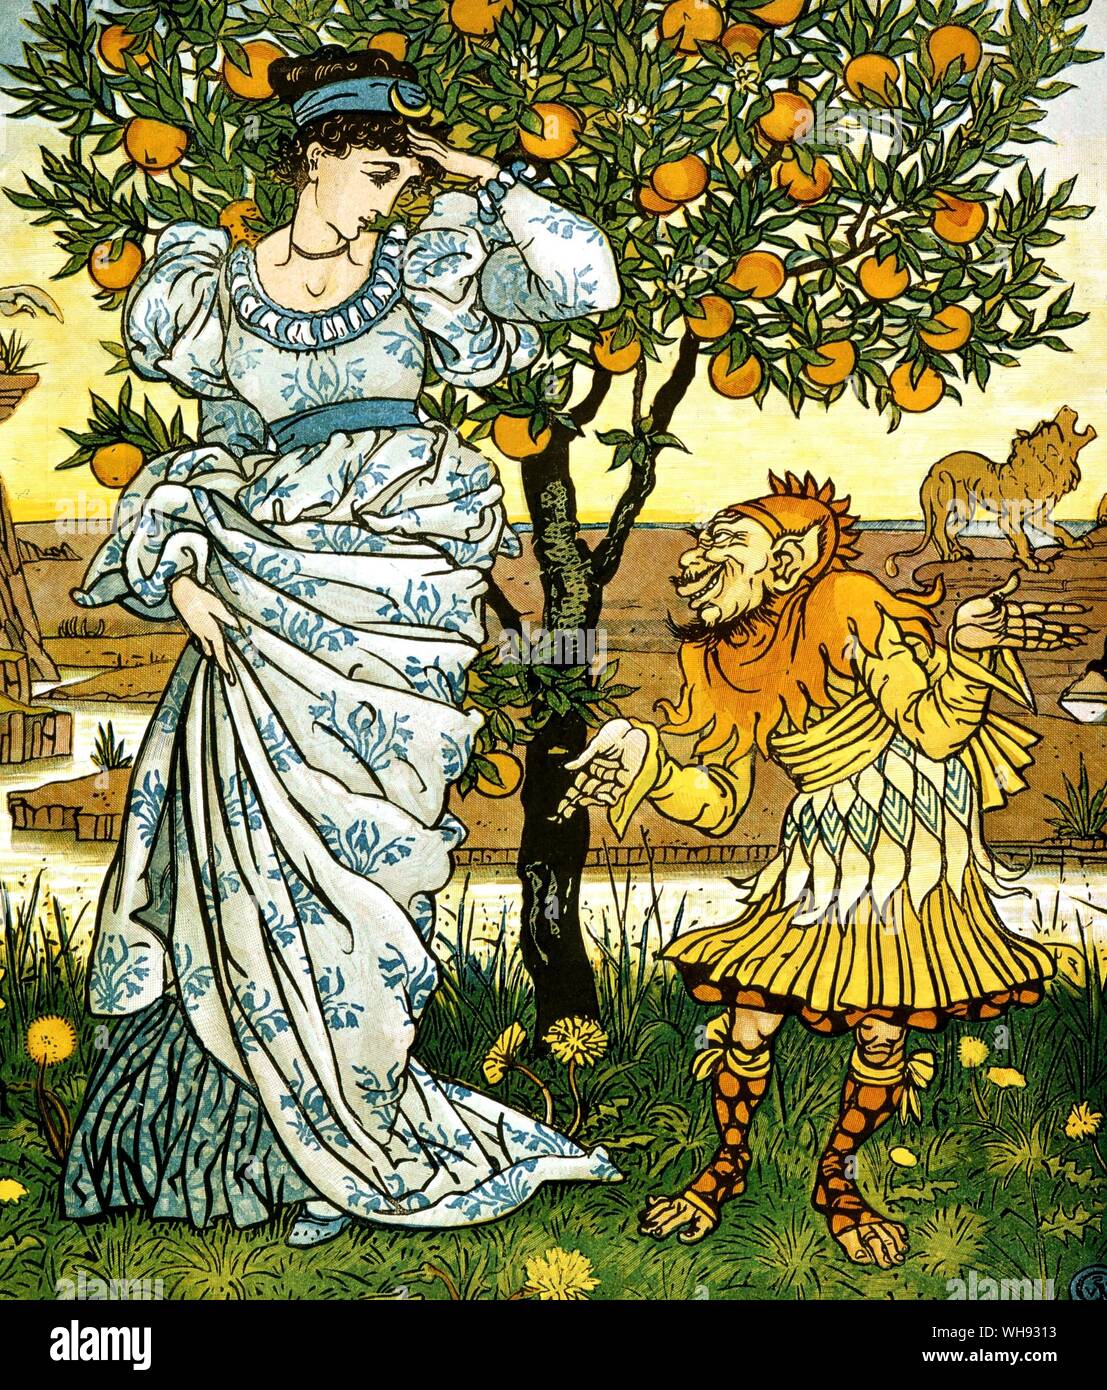 The Yellow Dwarf story. Illustration by Walter Crane, 1876. 'Observe me well, Princess, before you give me your word', said the Yellow Dwarf. Stock Photo